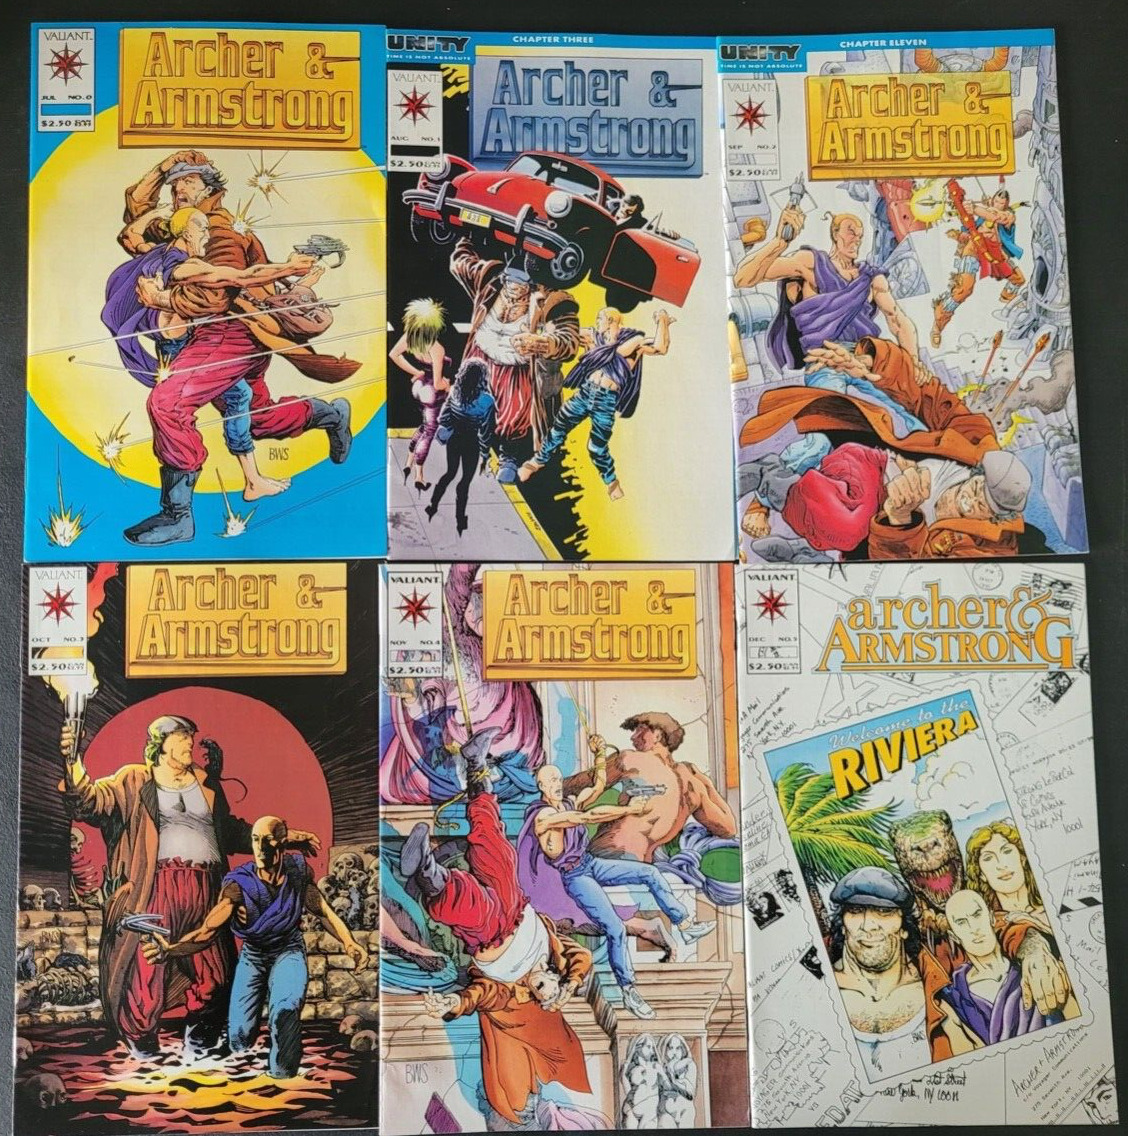 ARCHER & ARMSTRONG #0, 1-26 (1992) VALIANT COMICS FULL SERIES 1ST APPEARANCE